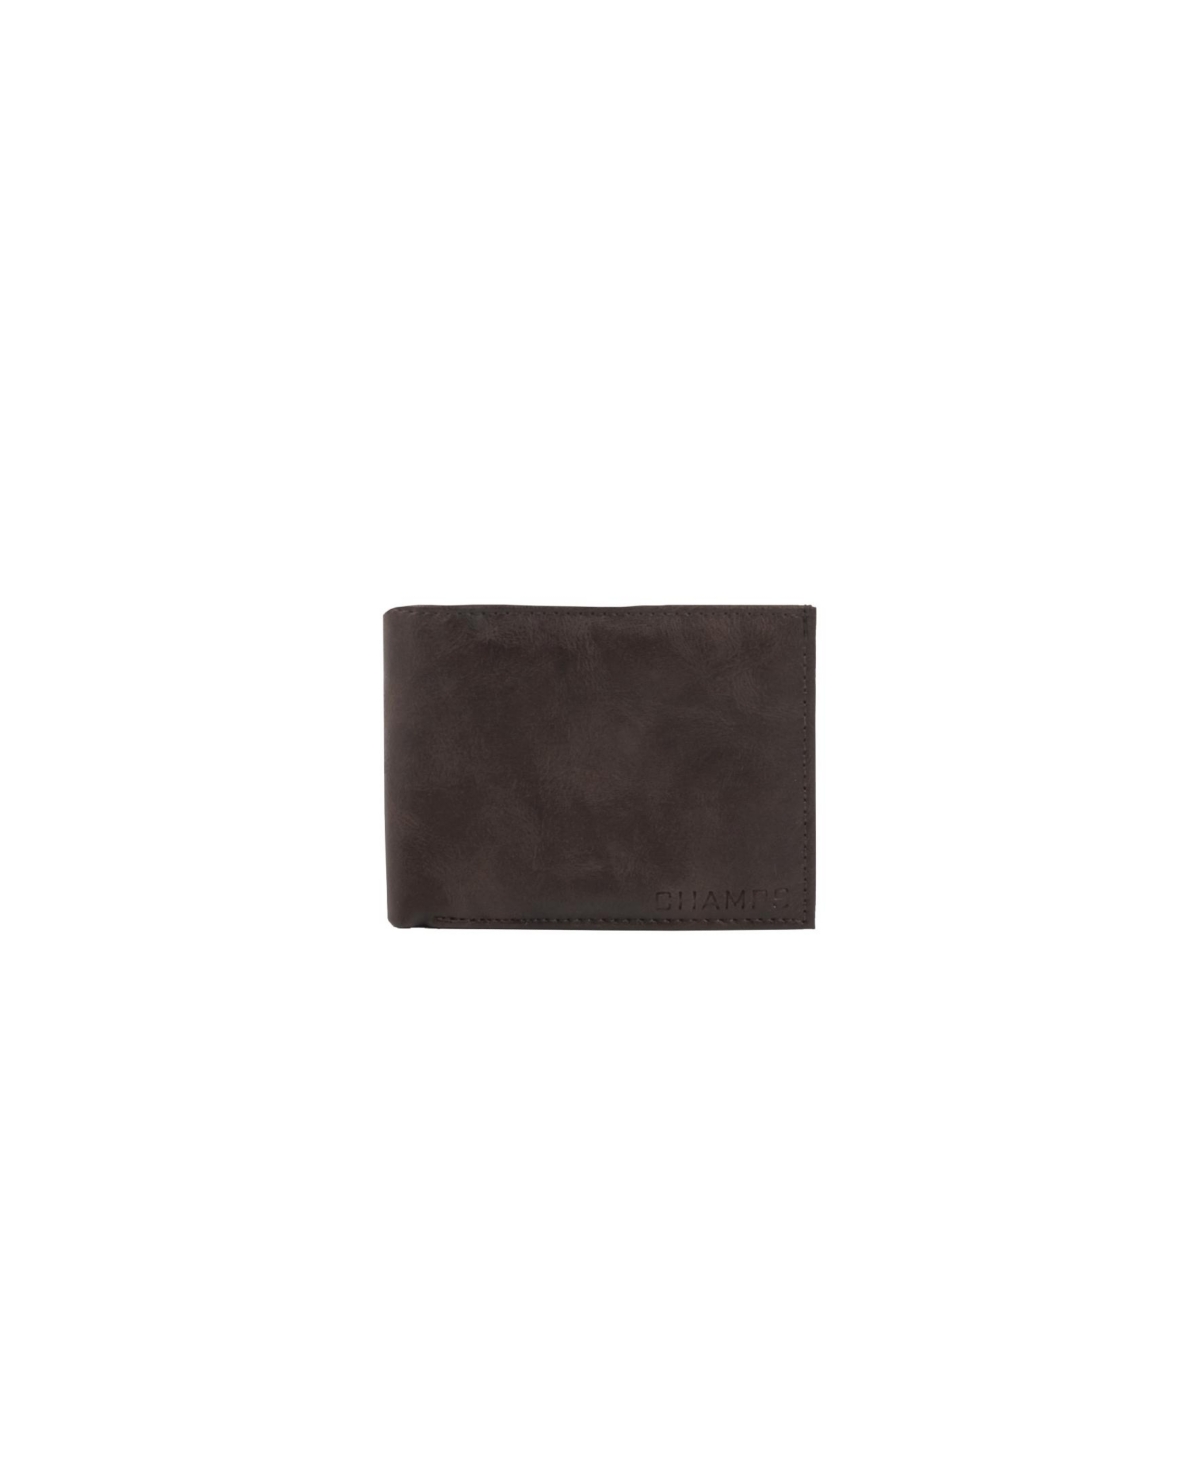 Men's Leather Rfid Wallet in Gift Box - Brown